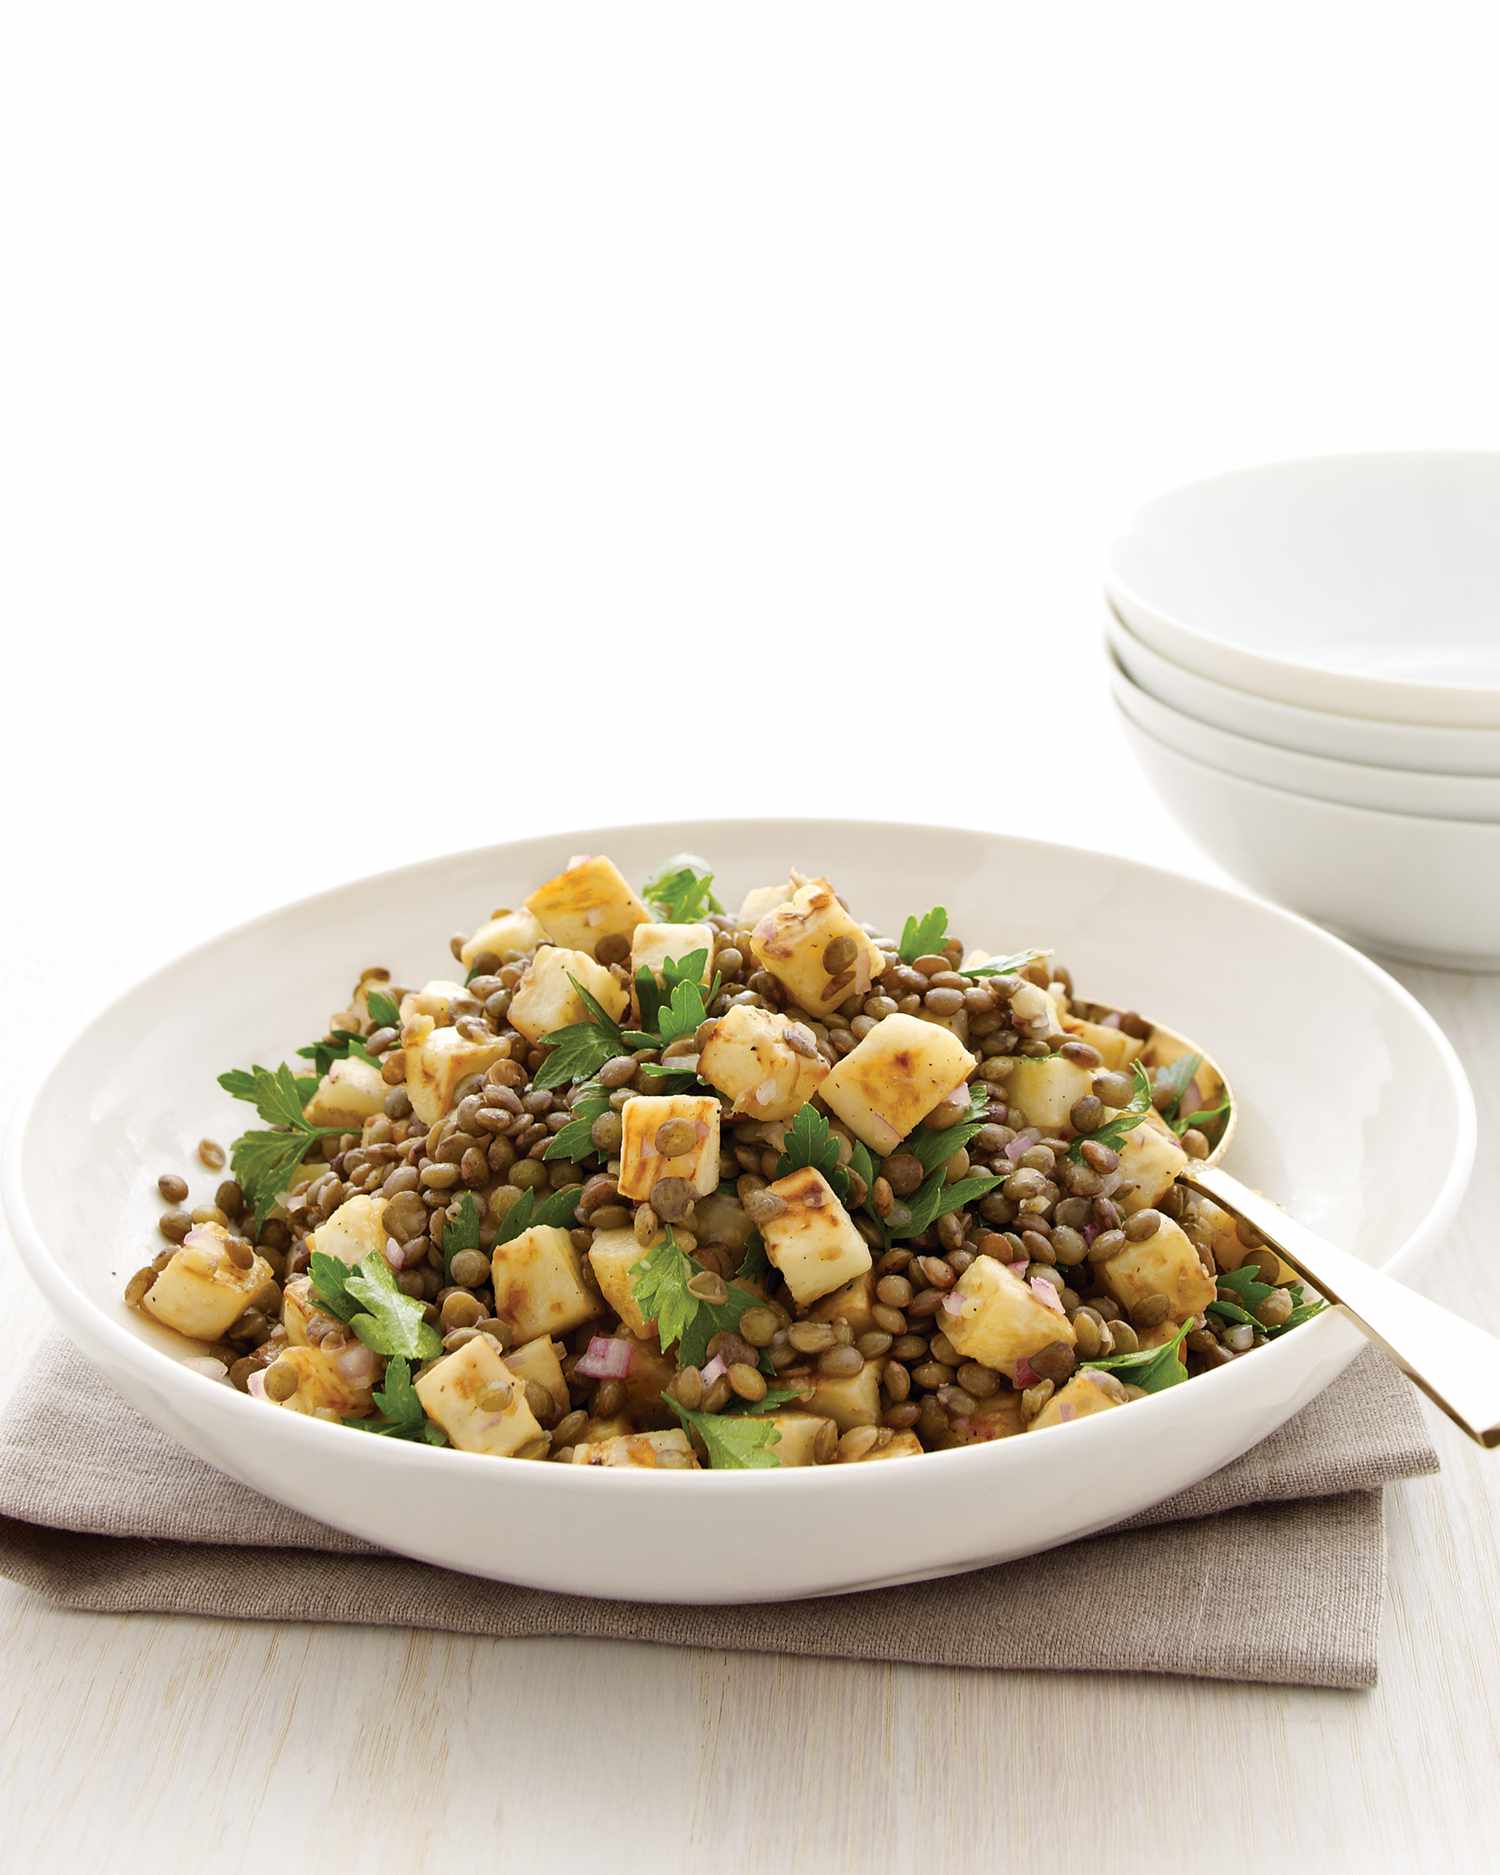 French Lentils with Caramelized Celery Root and Parsley